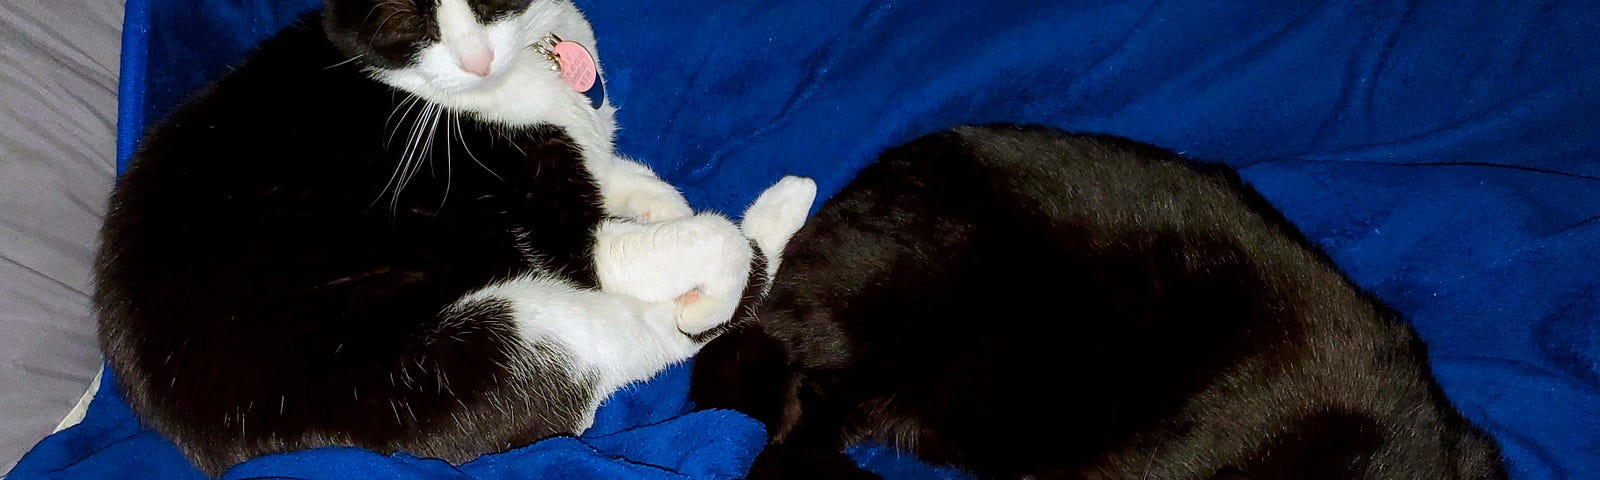 A black and white cat next to a black cat sleeping on a bluebathrobe on a bed.